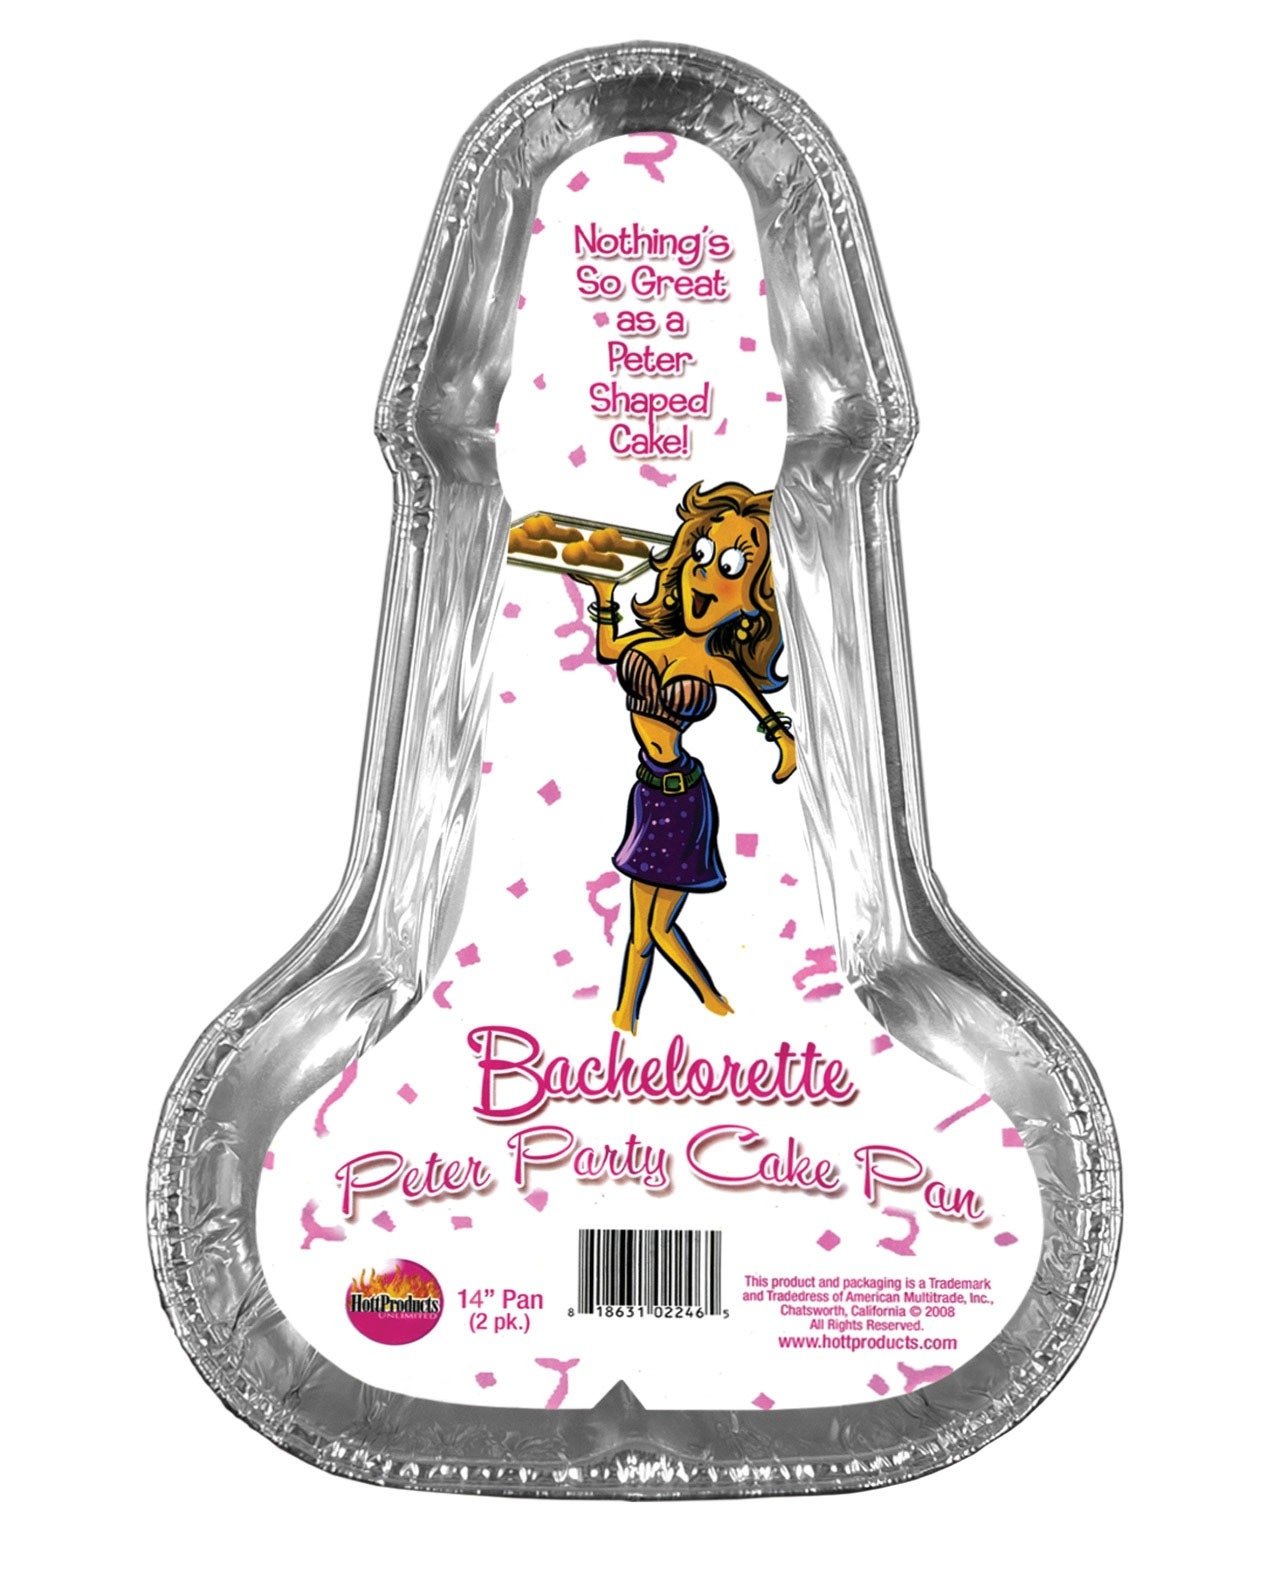 Bachelorette Disposable Peter Party Cake Pan  by Hott products